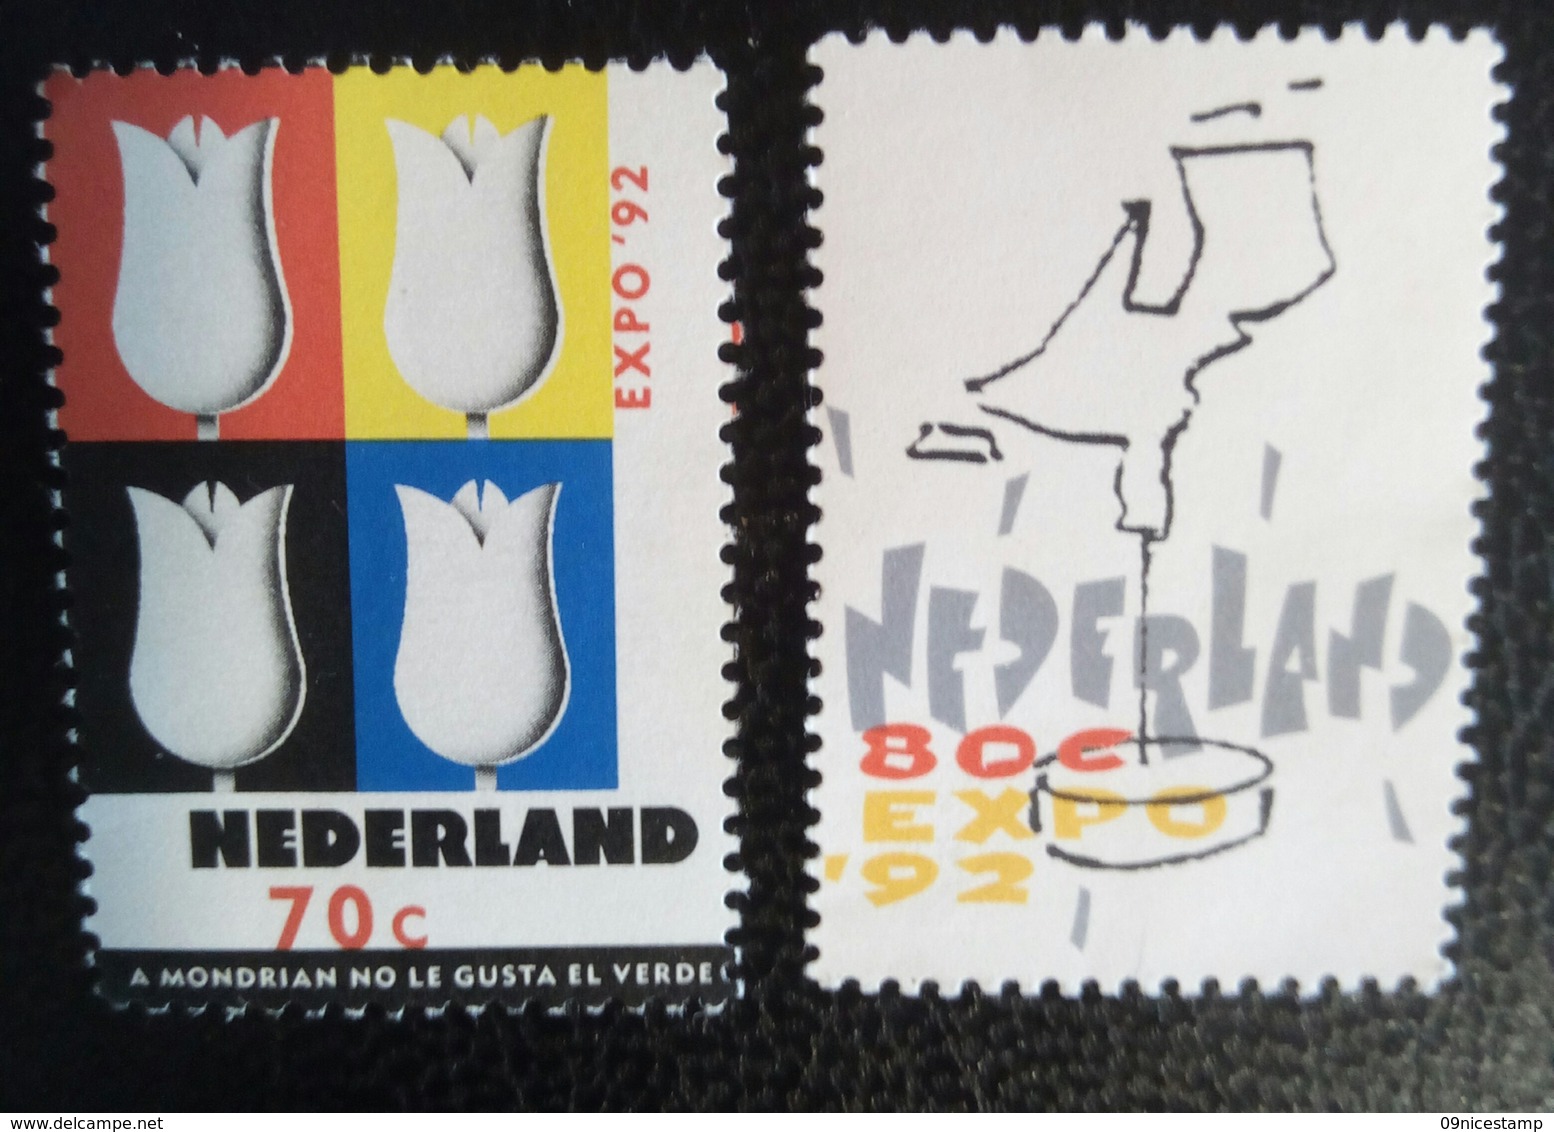 Stamps Of The Nederlands Expo 1992, Used But Not Cancelled - Unused Stamps